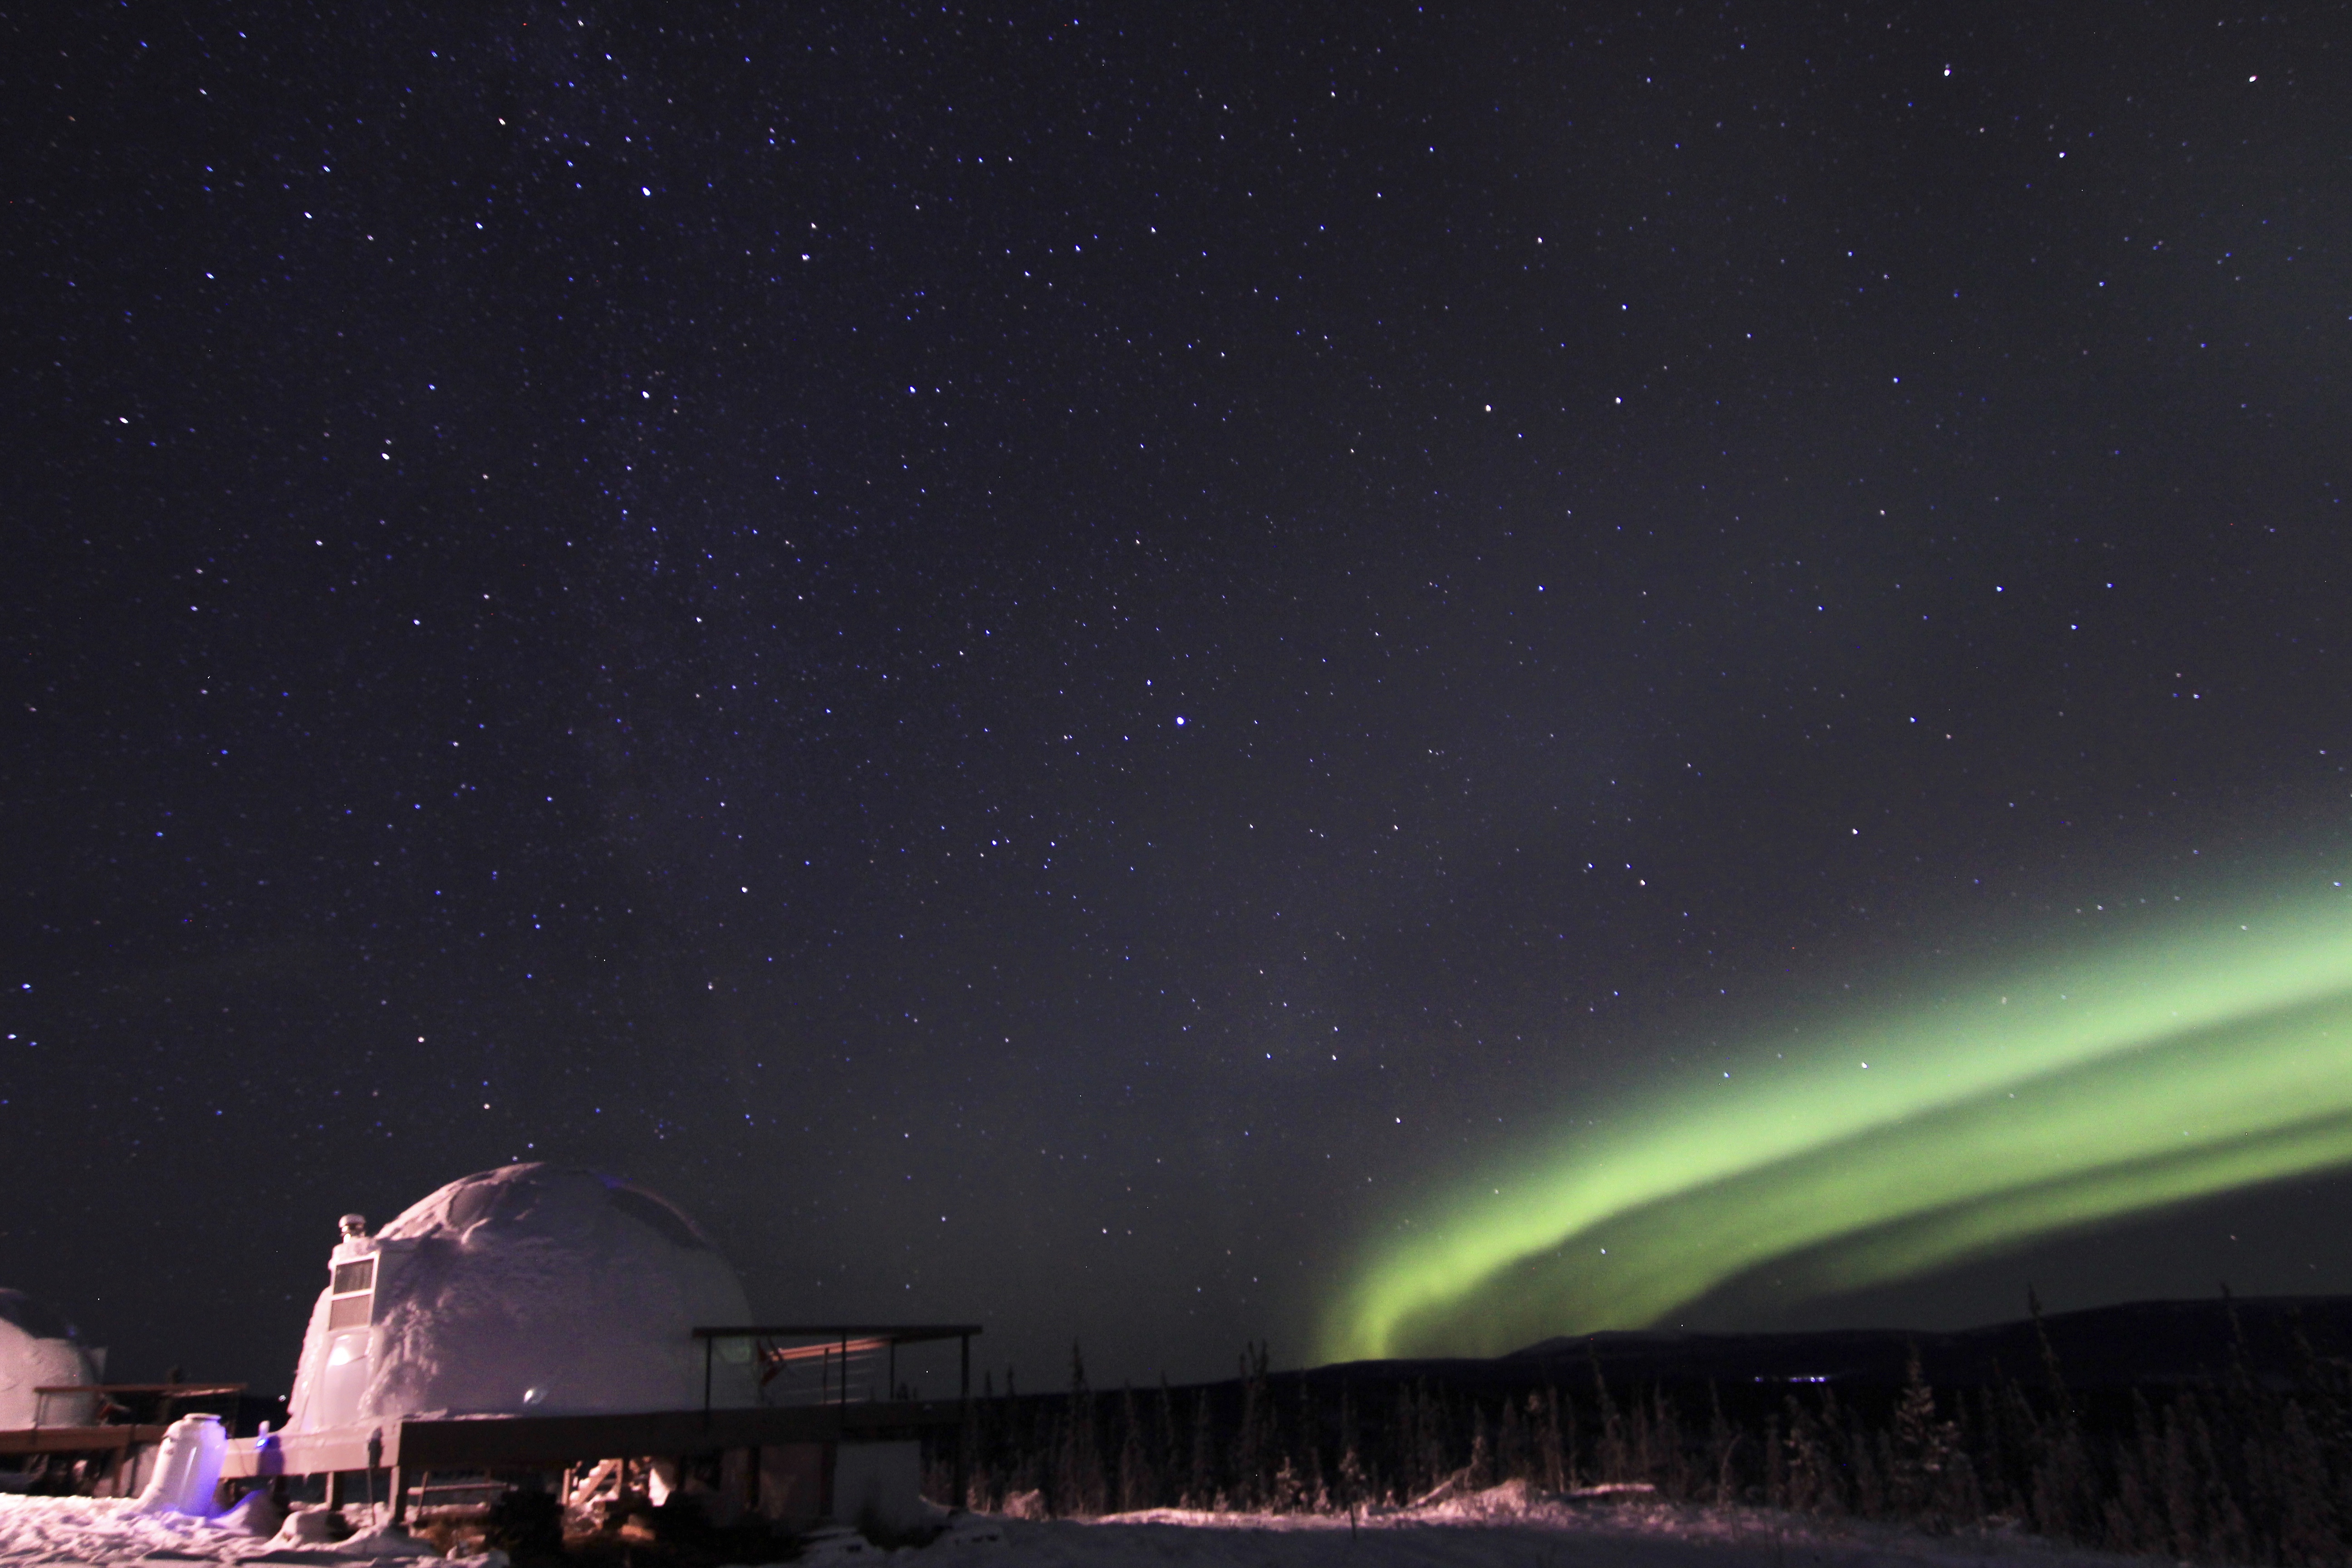 streaks of auroral light appear in a dark sky, with a dome in the foreground